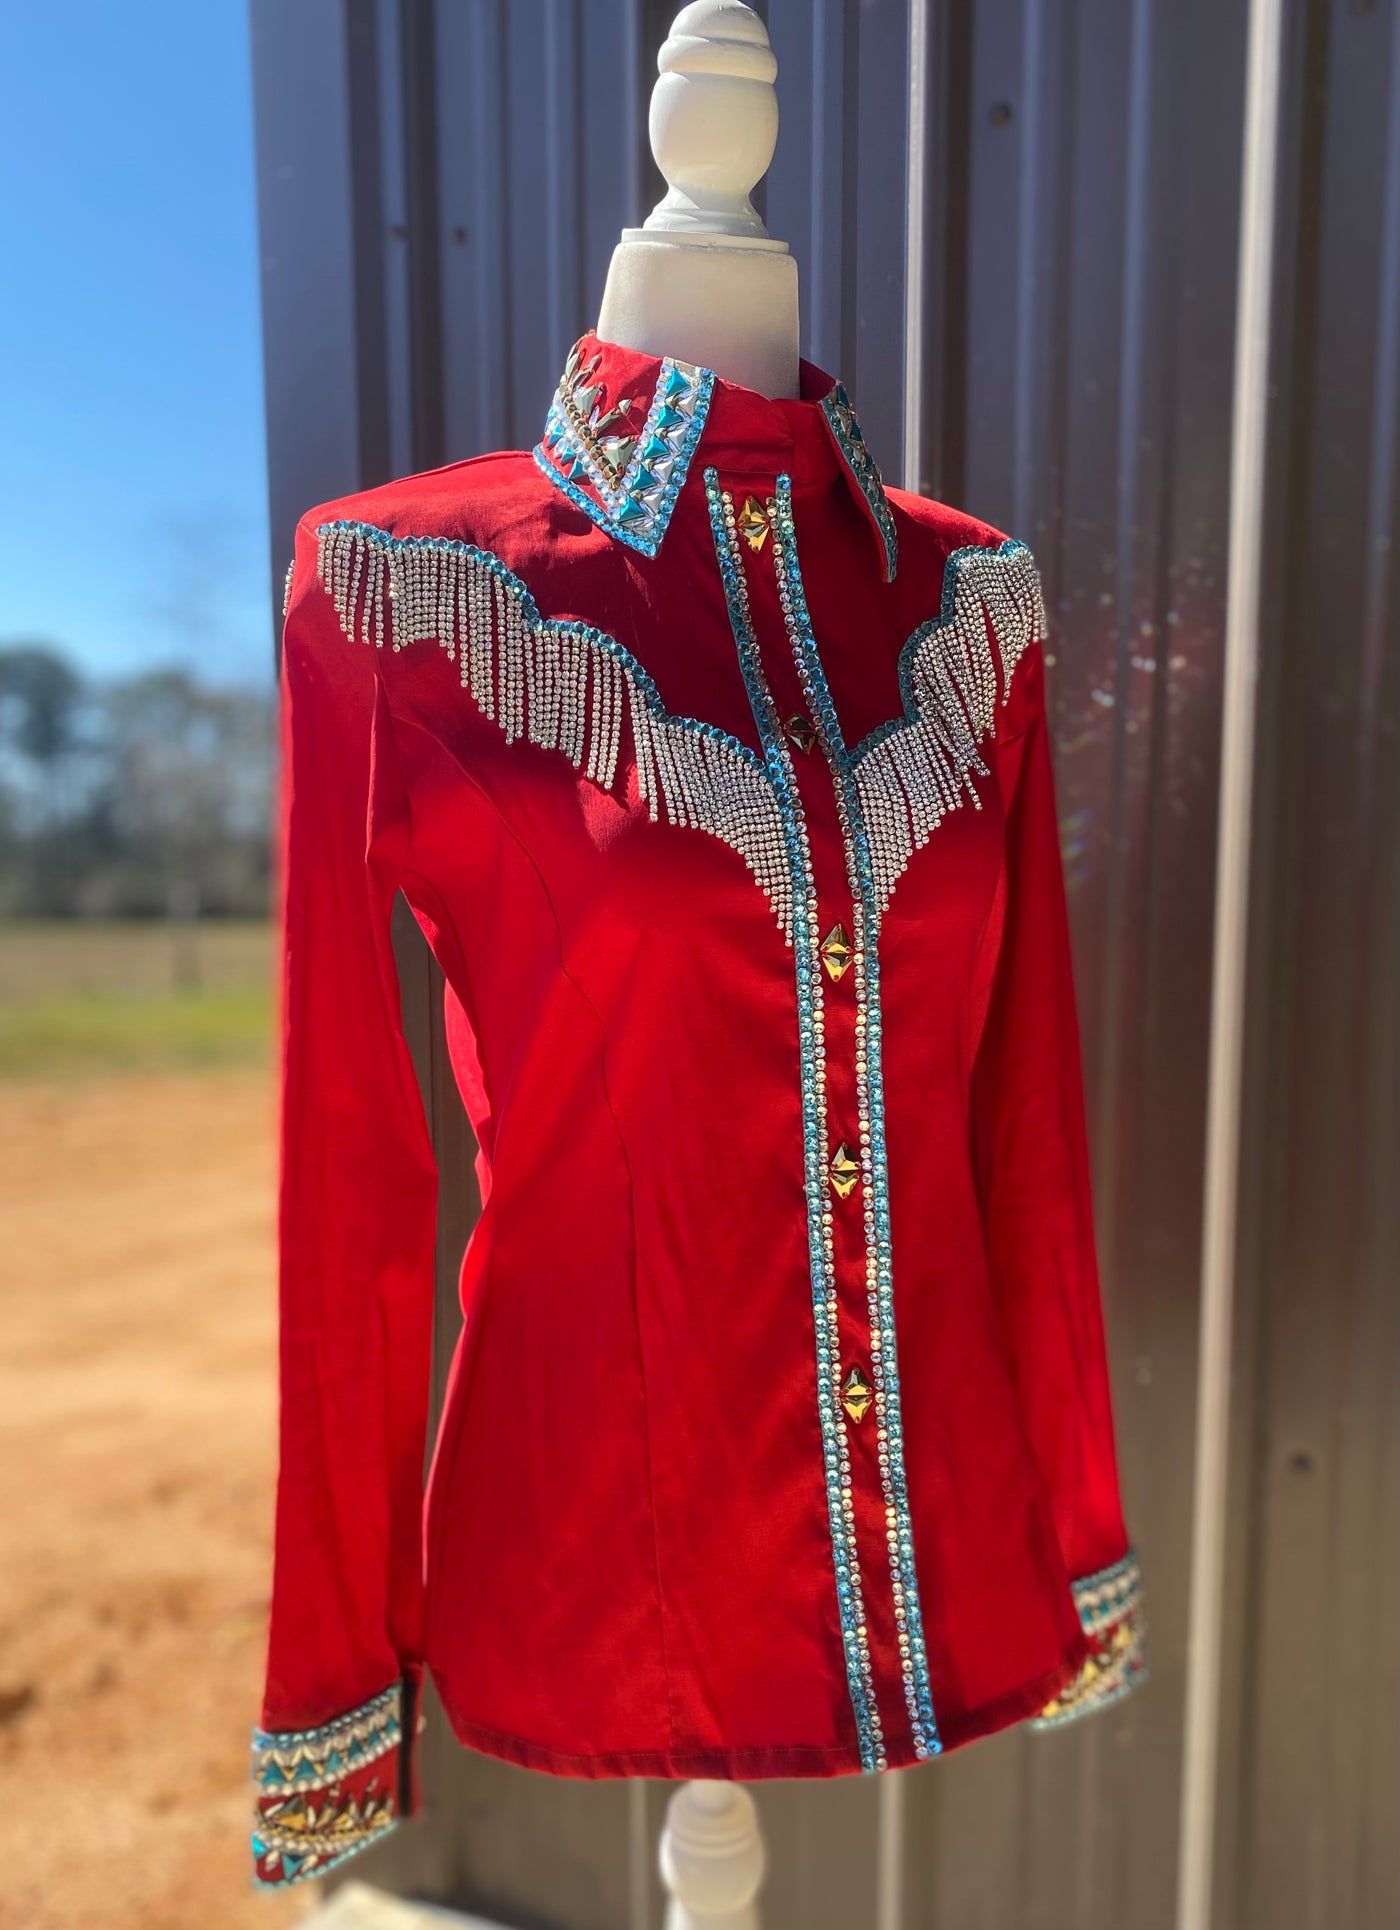 "Dolly" Fringe in Red by Saguaro